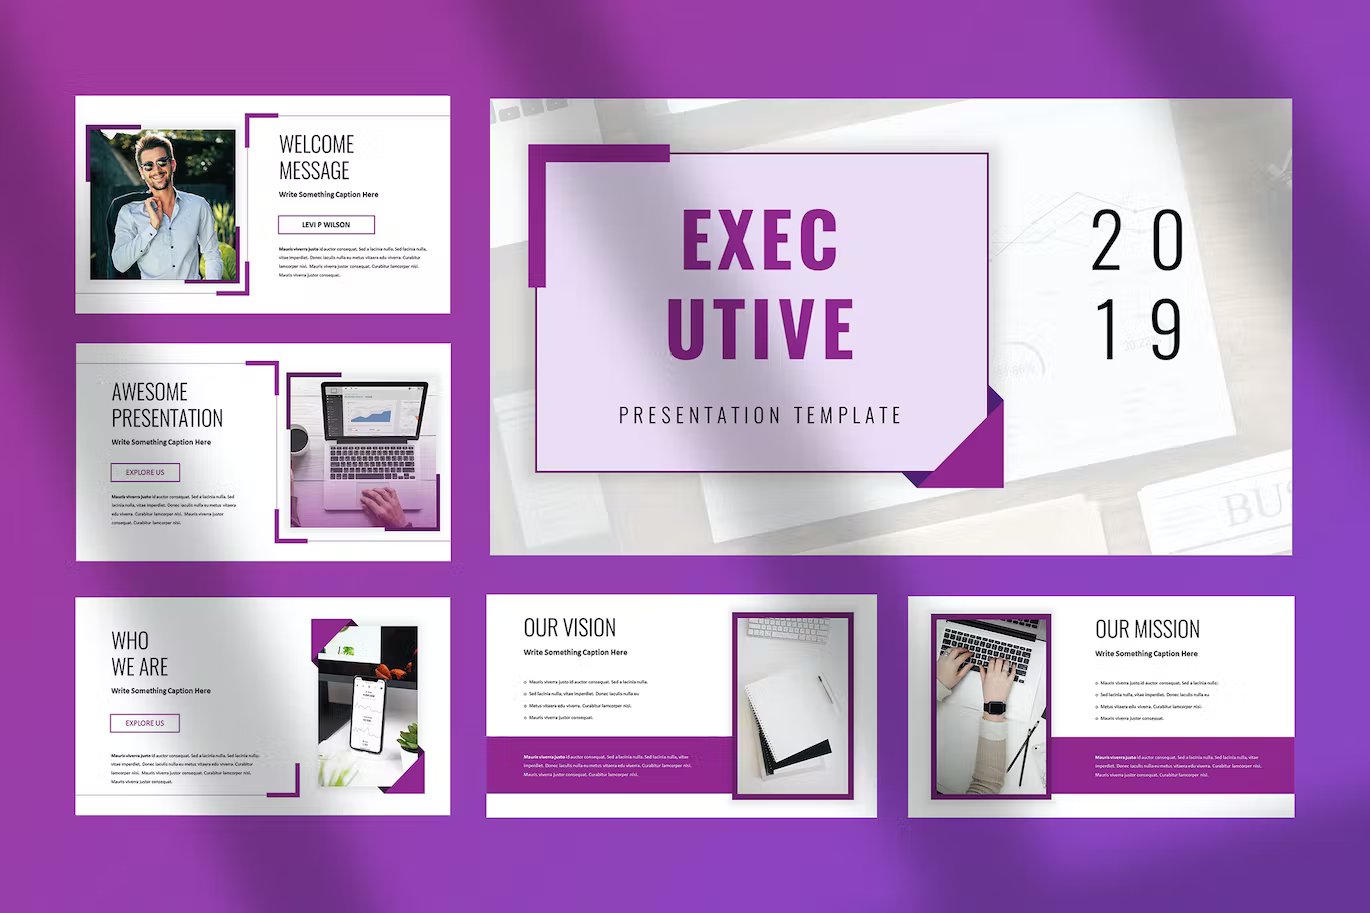 A set of 6 different executive - powerpoint presentation for business templates in white, purple and black on a purple background.